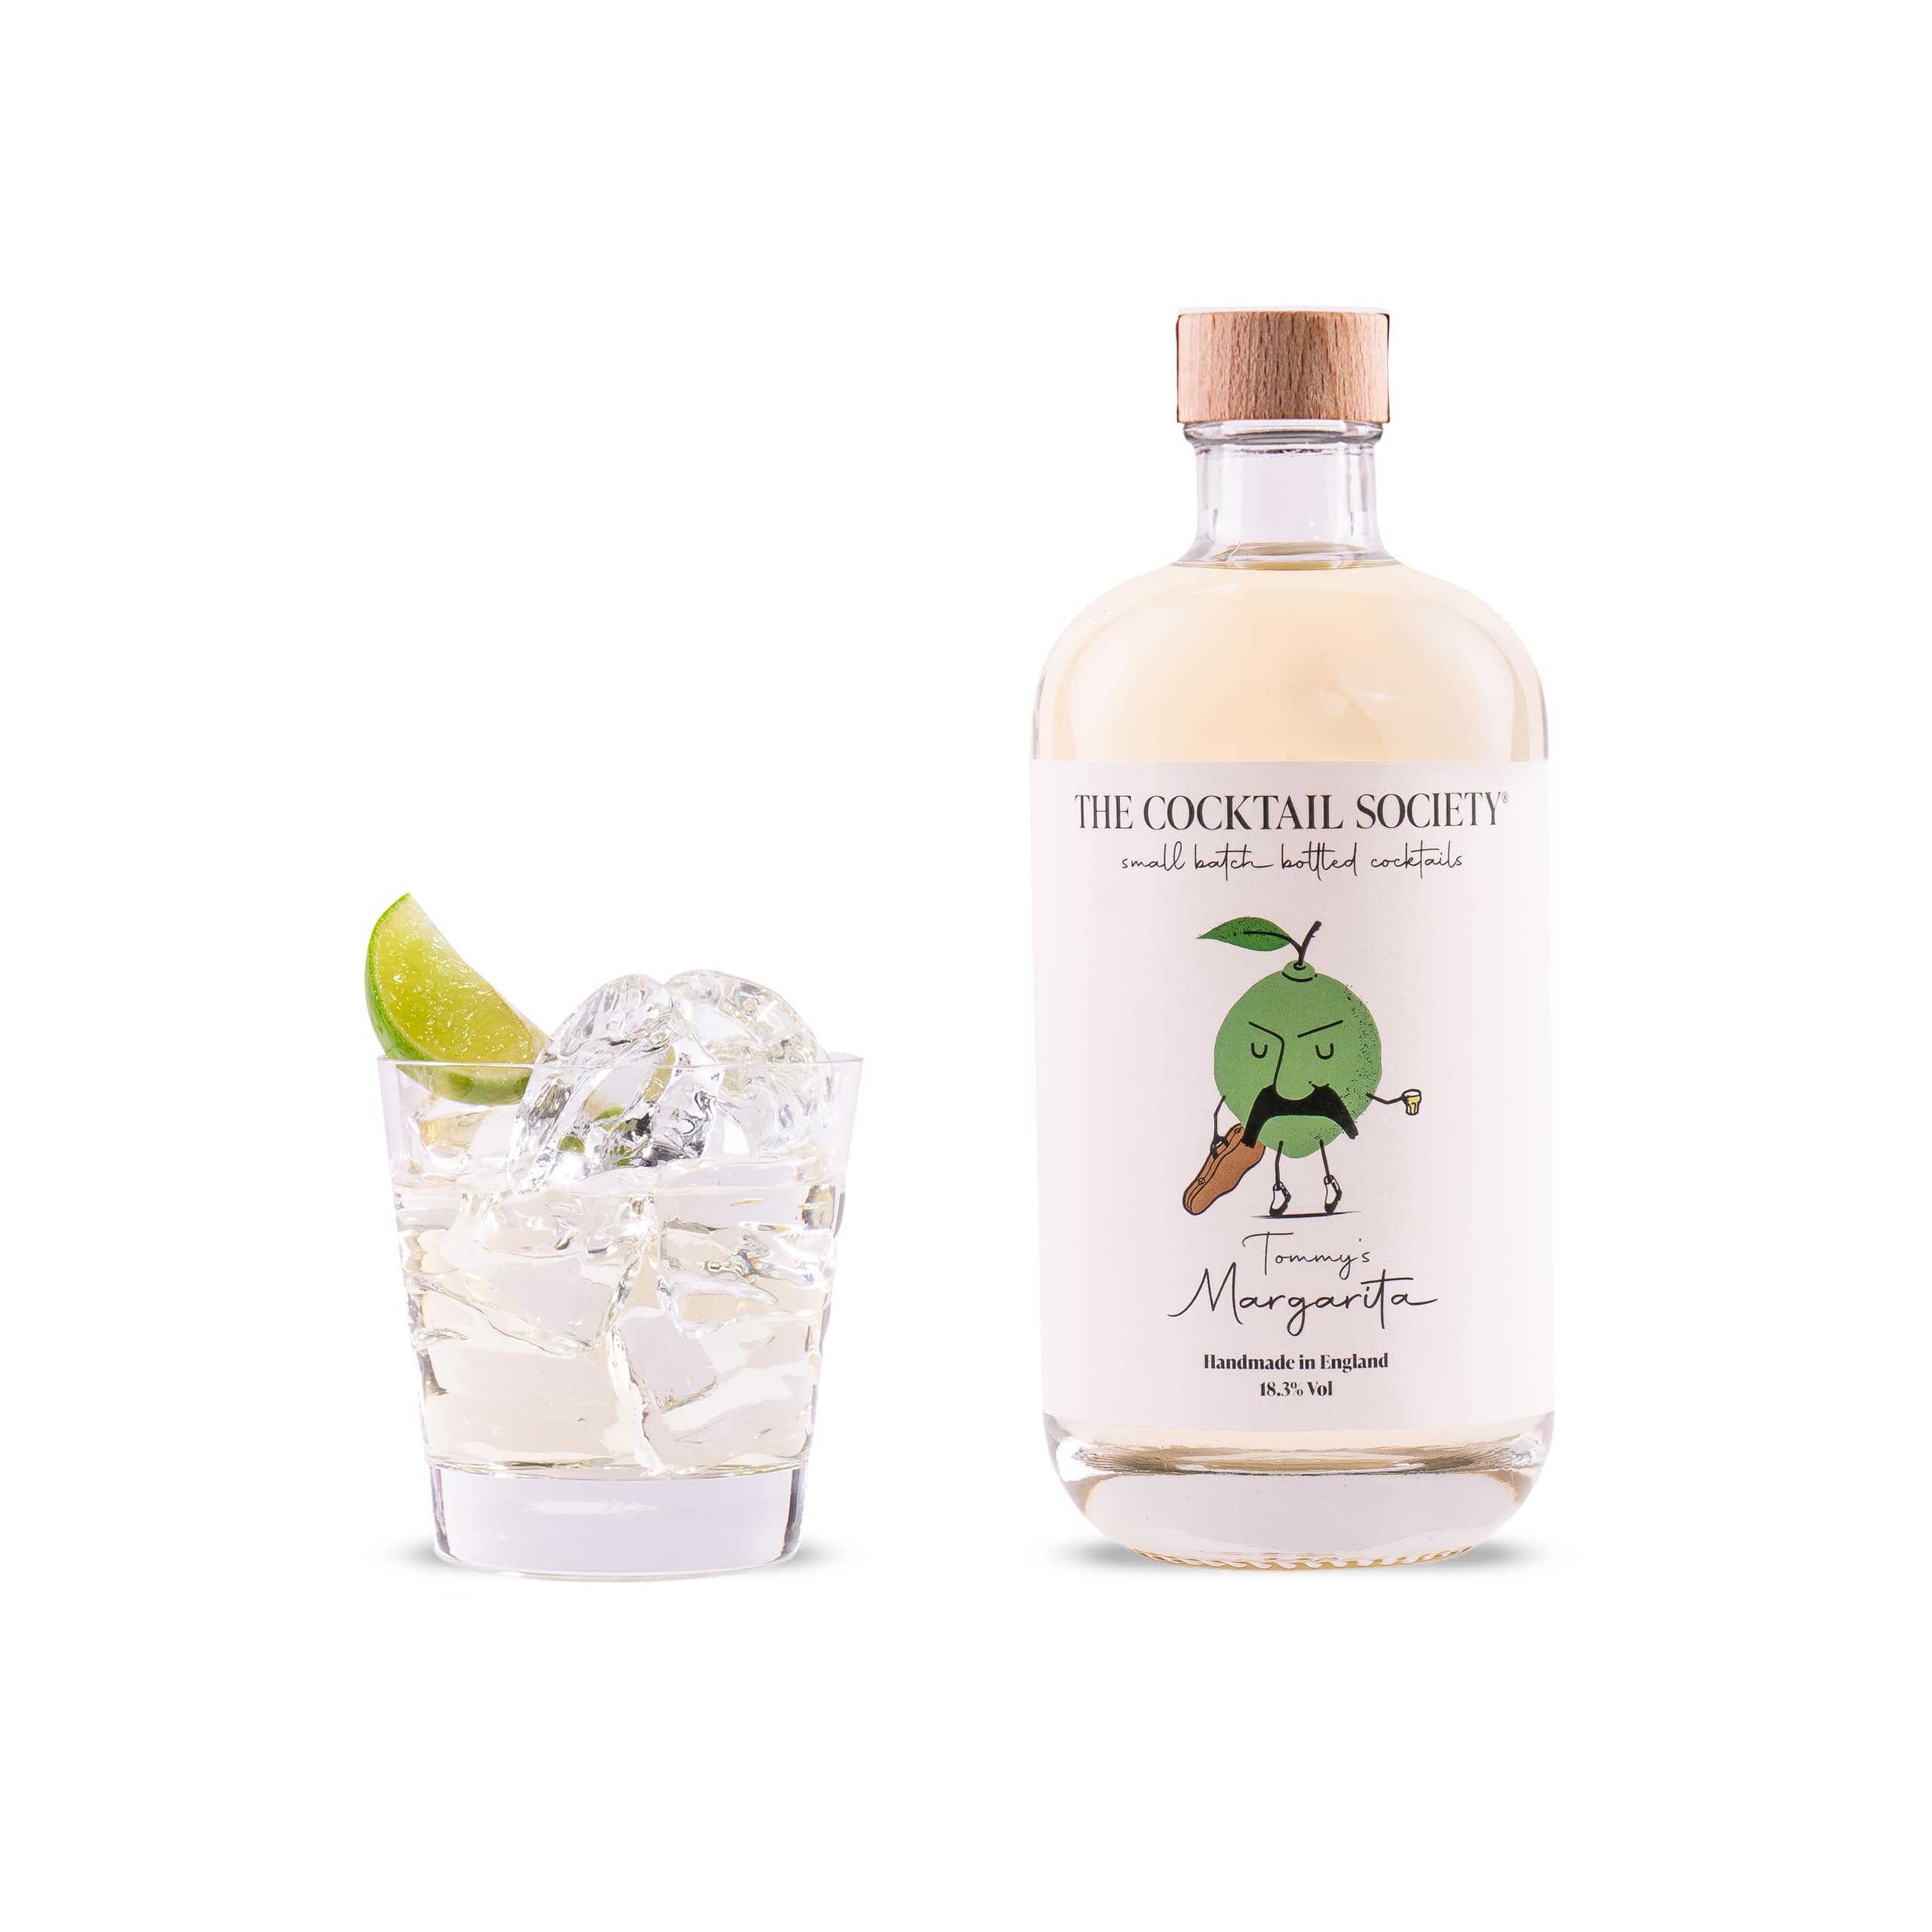 The Cocktail Society Tommy's Margarita 500ml Bottled Cocktail